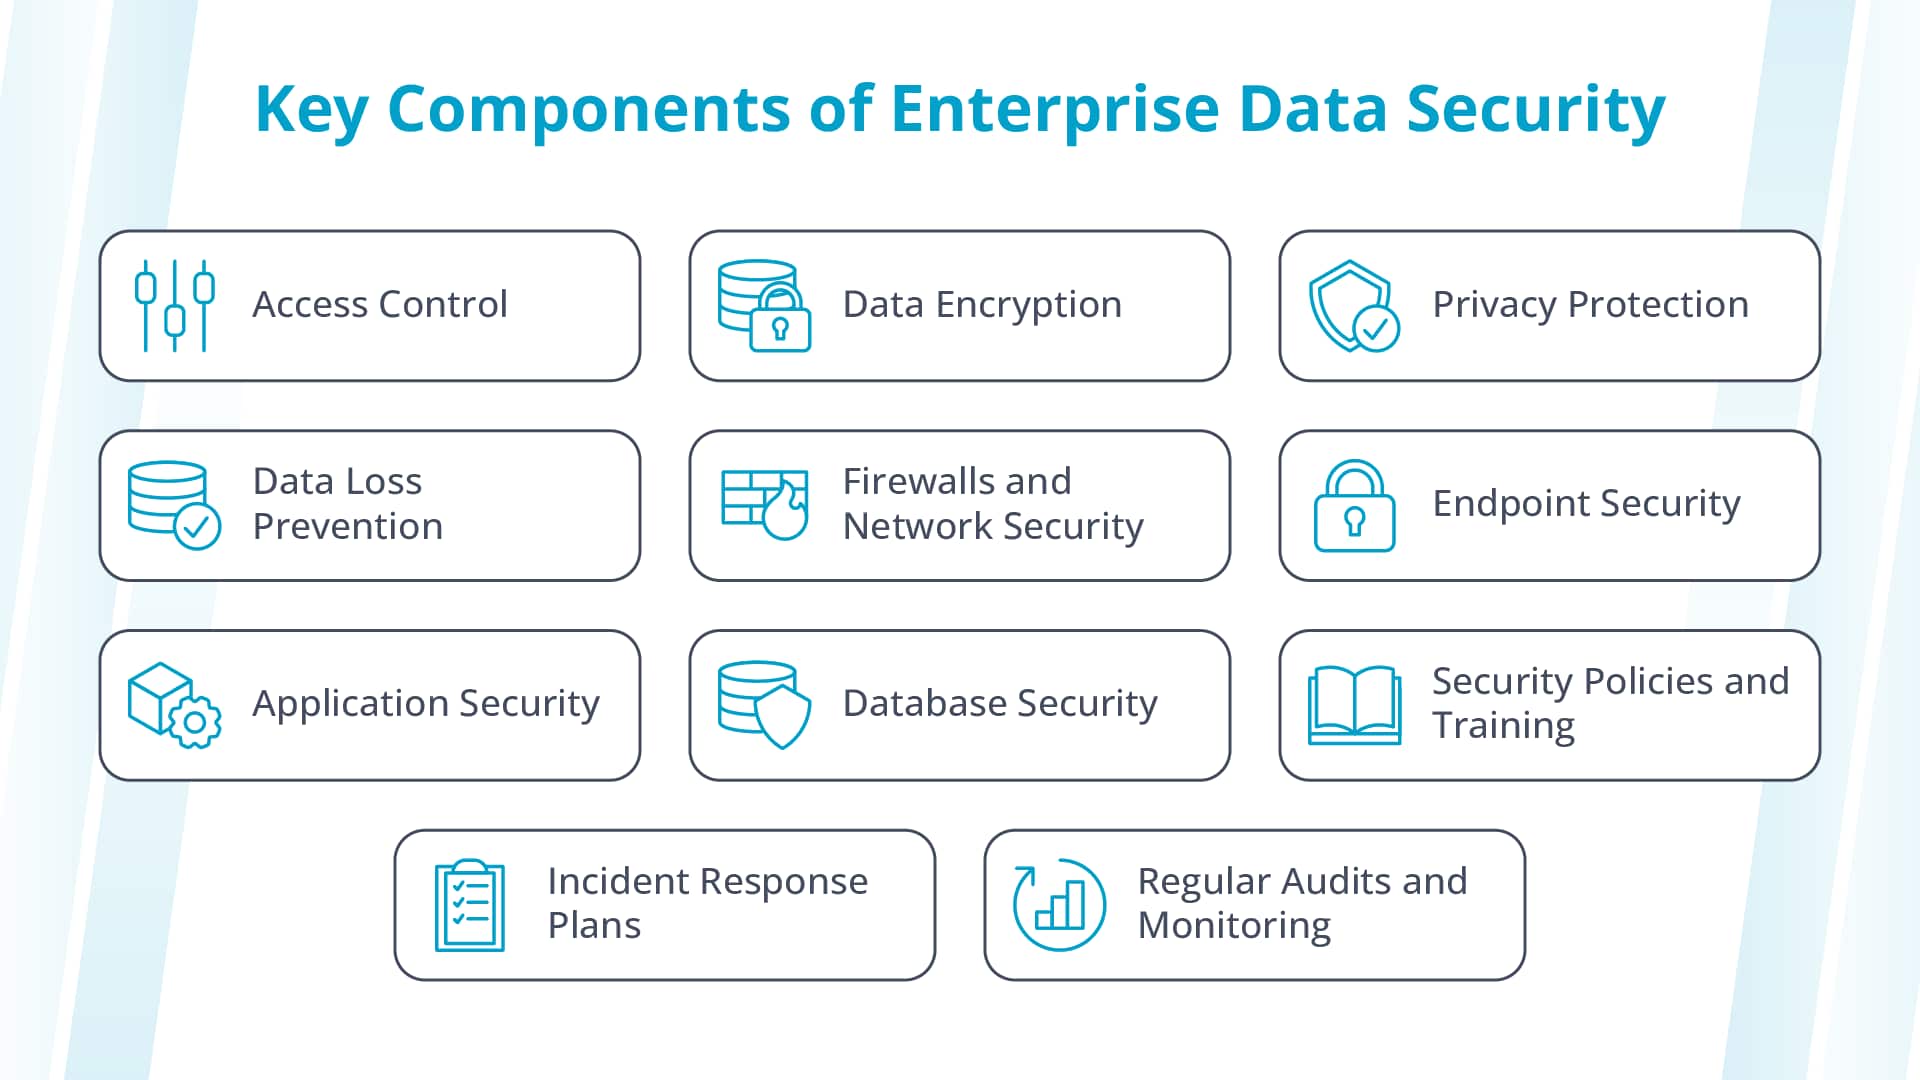 Key components to include in your enterprise data security plan.